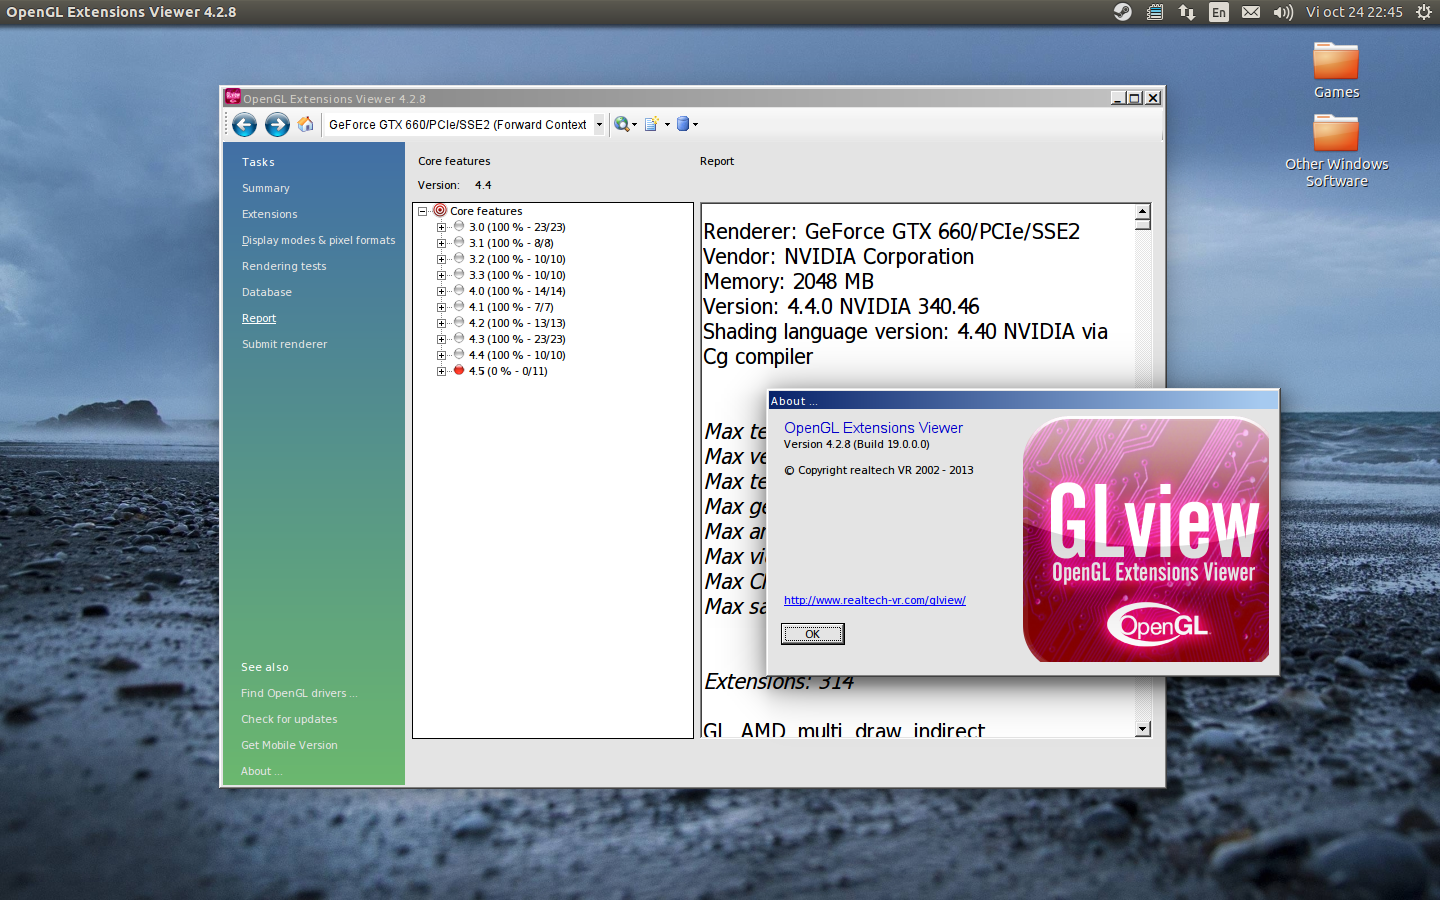 OpenGL Extension Viewer 6.4.1.1 free downloads